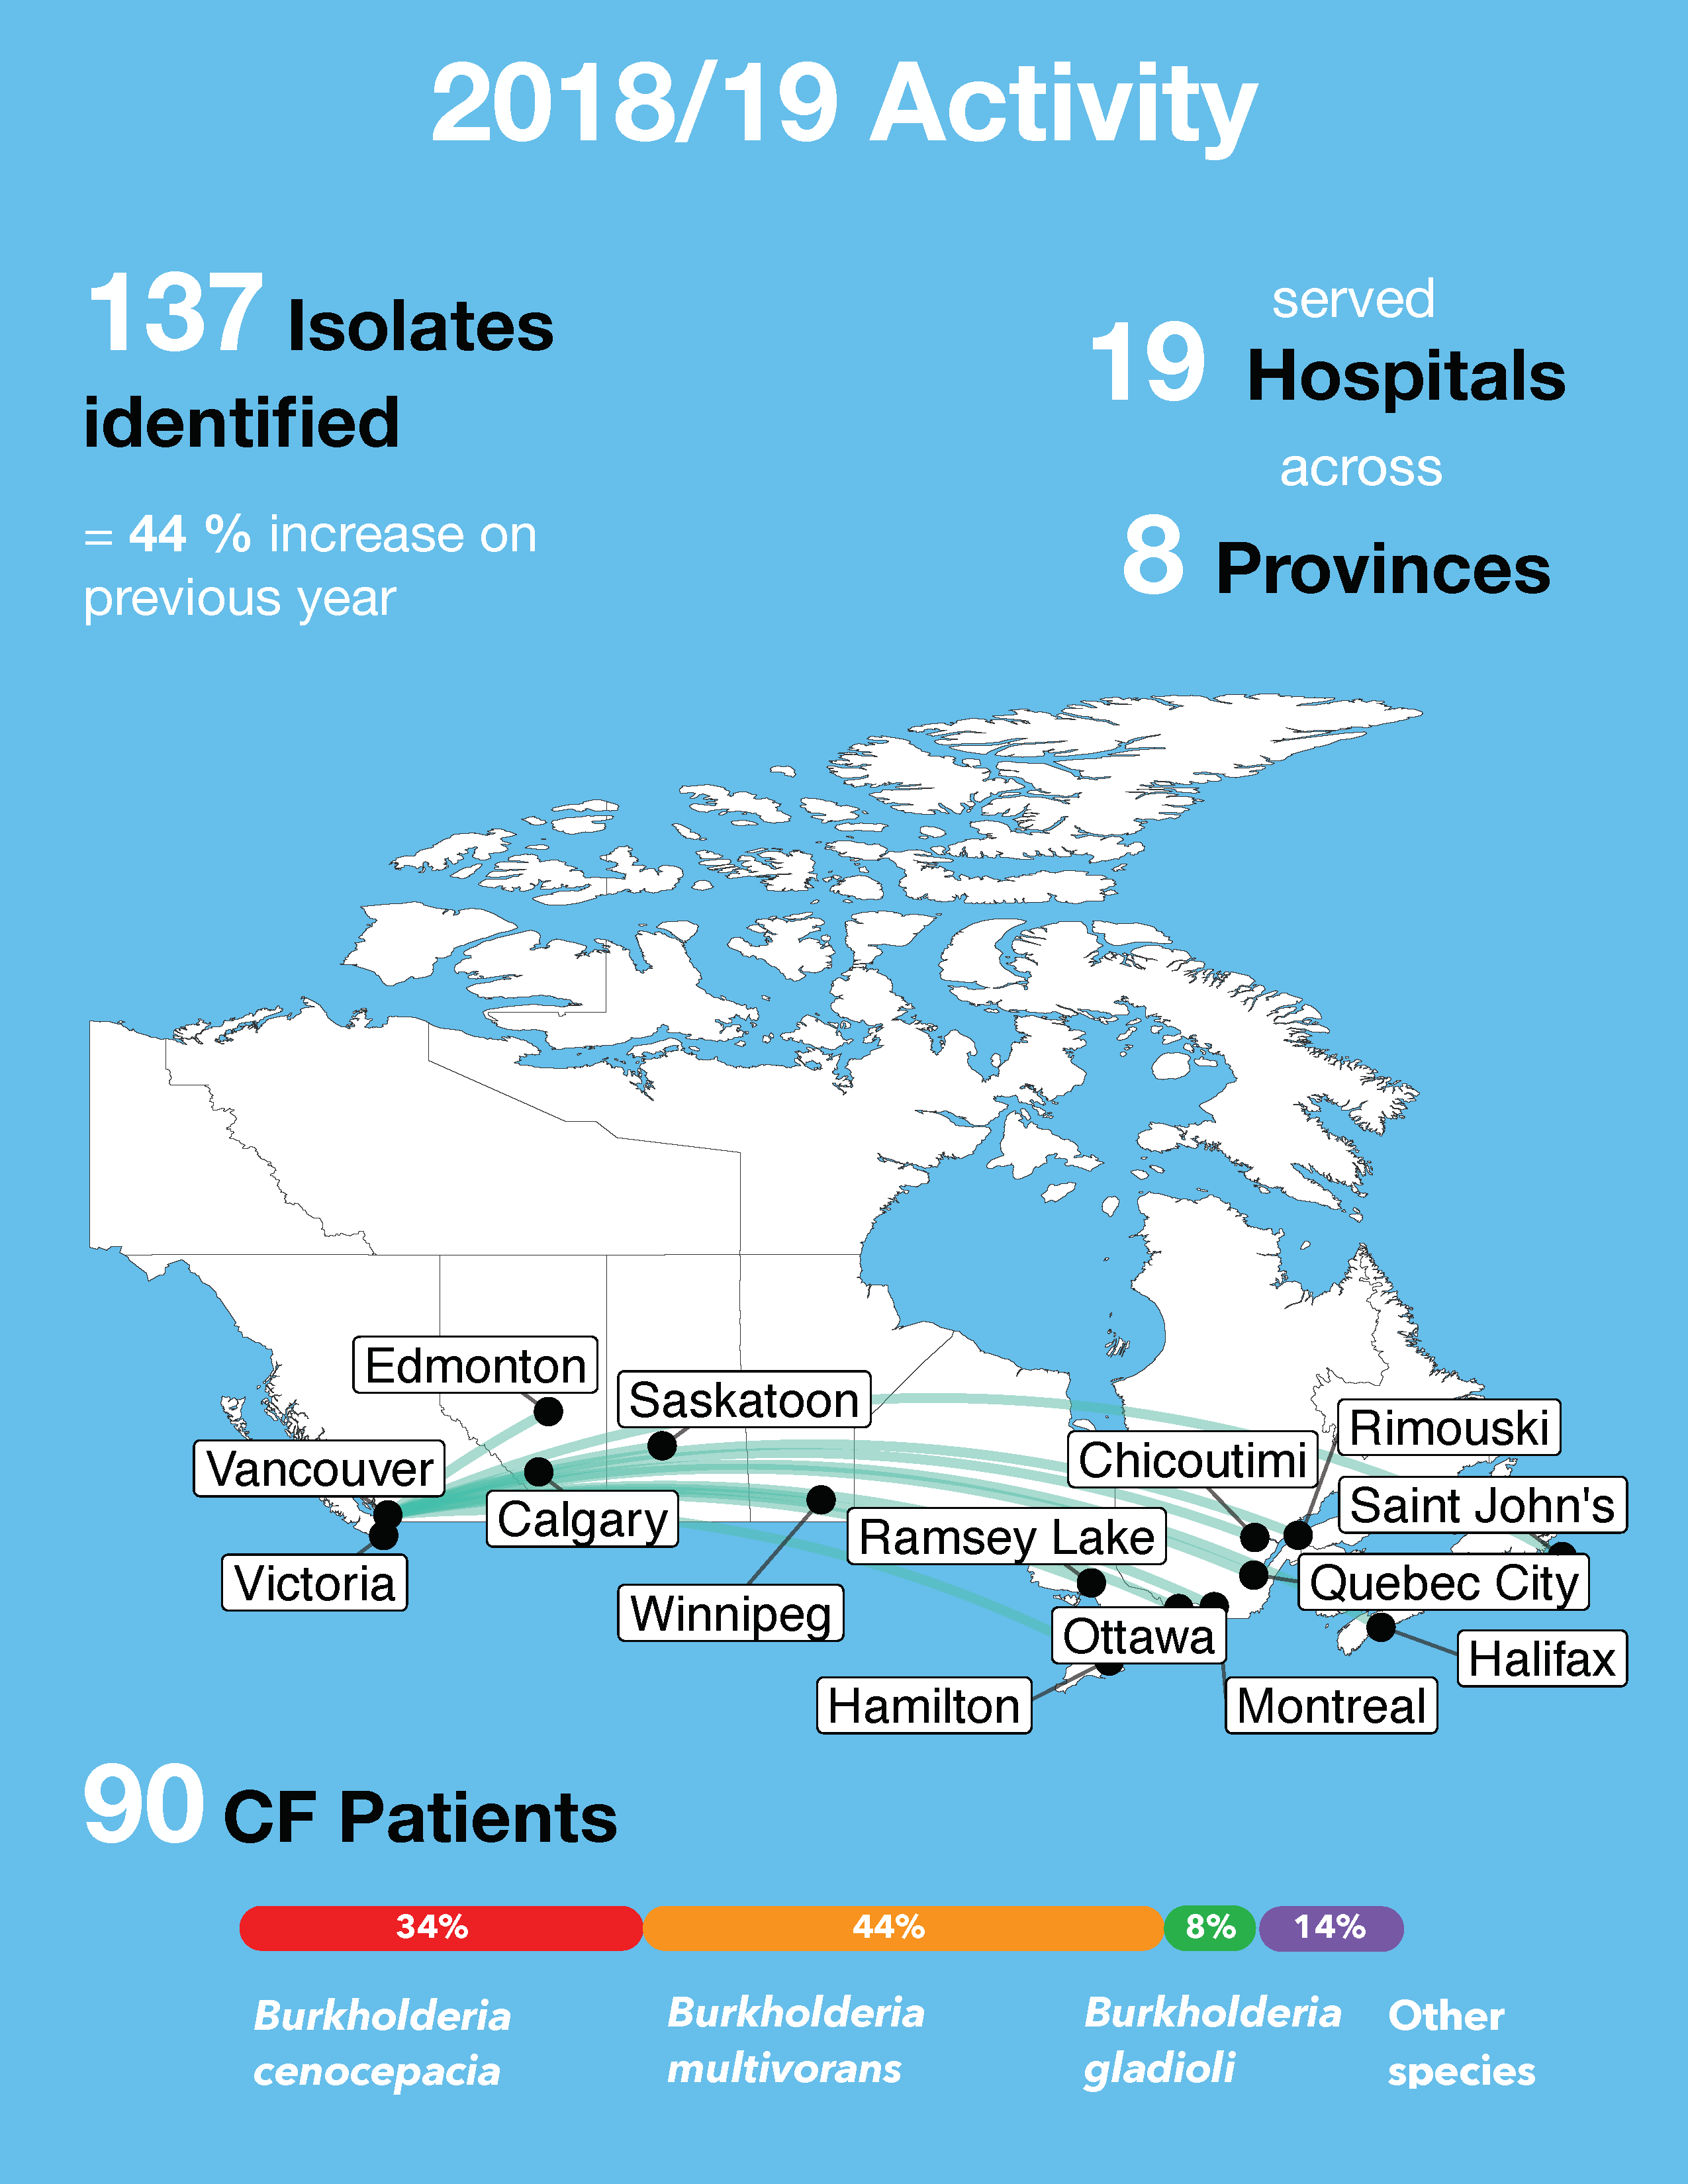 2019 infographic - shows 137 isolates identified (44% increase on previous year), served 19 hospitals across 8 provinces, while 34% of cases were B. cenocepacia and 44% were B. multivorans